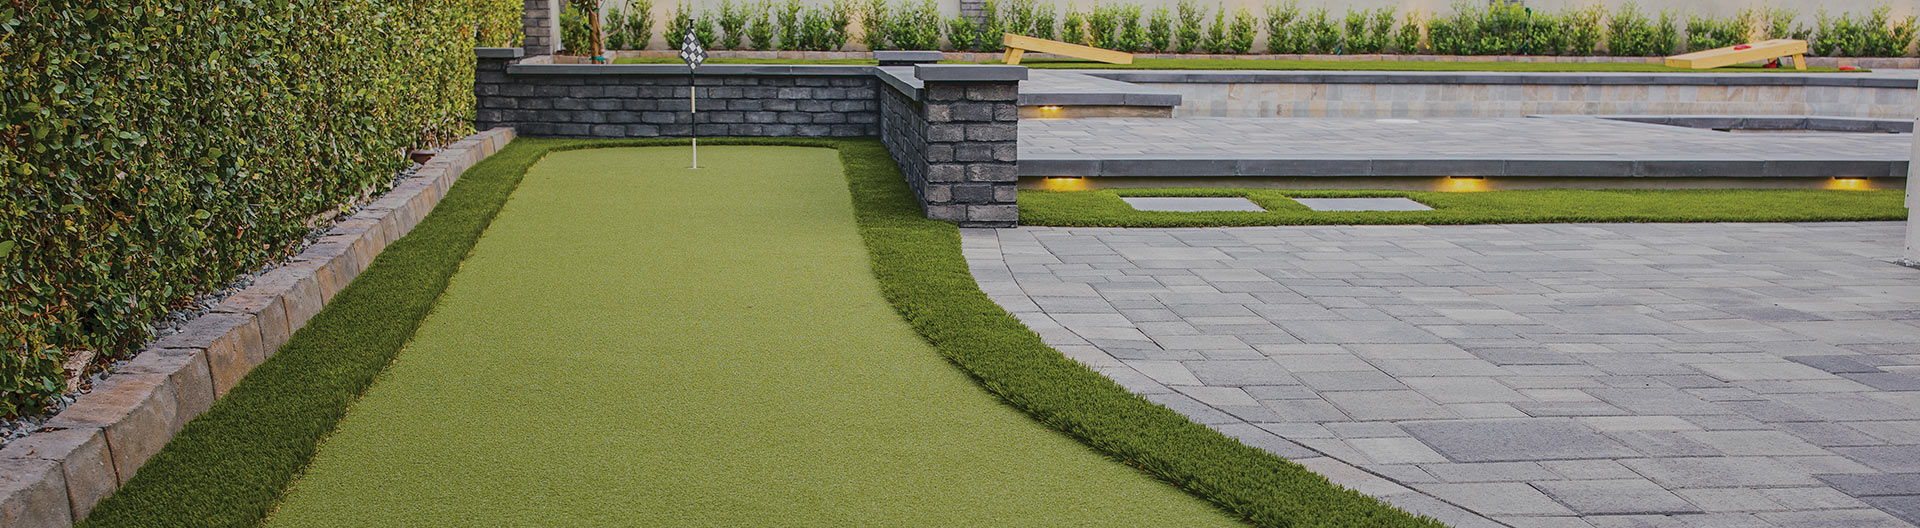 Turf putting green in a backyard with paver patio. 